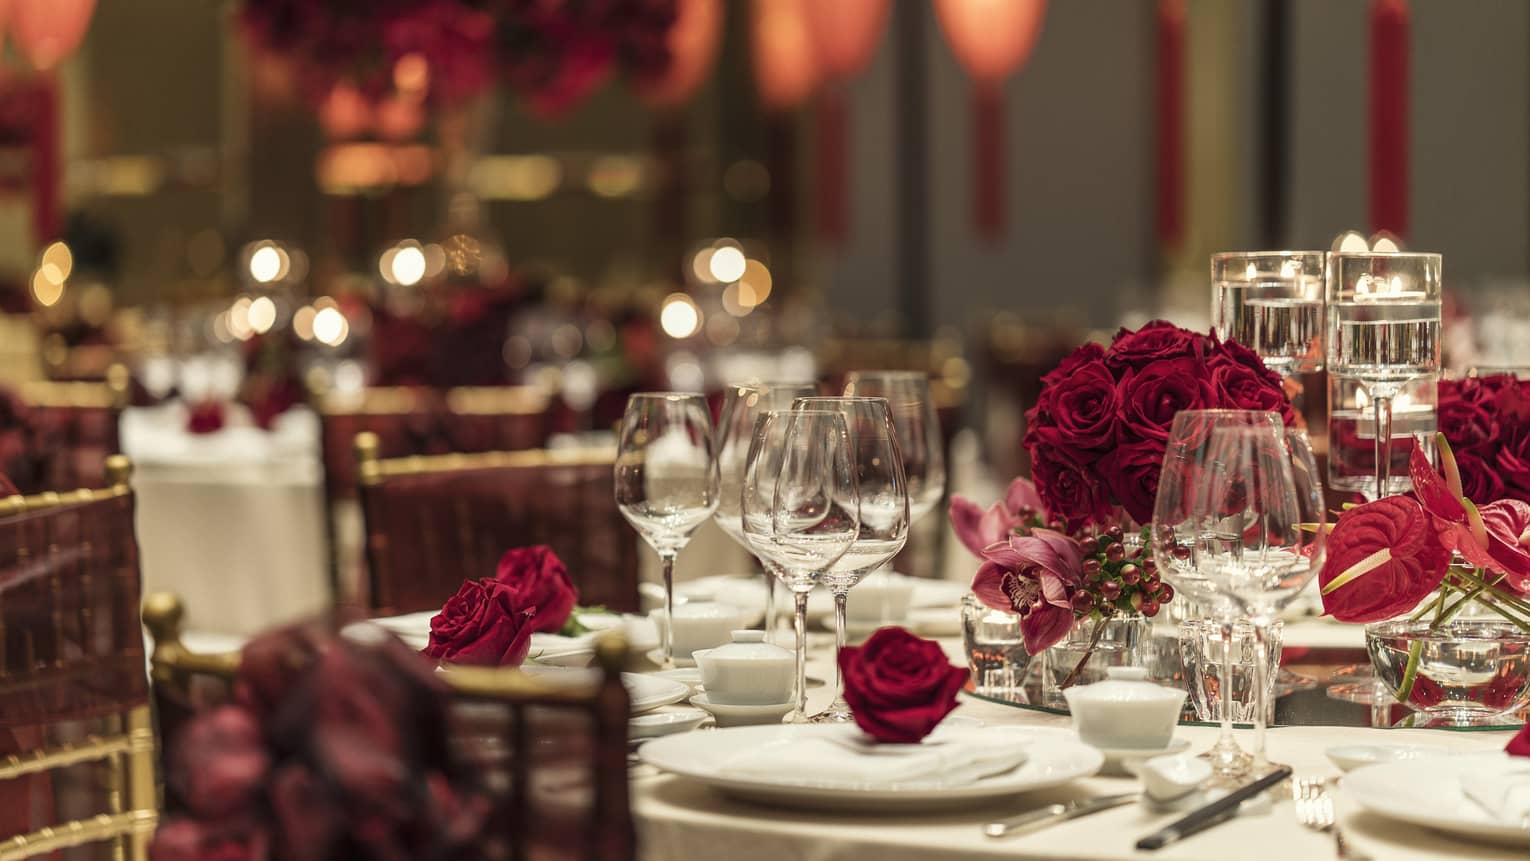 Elegant wedding banquet table with red roses, glassware, hanging paper lanterns in background